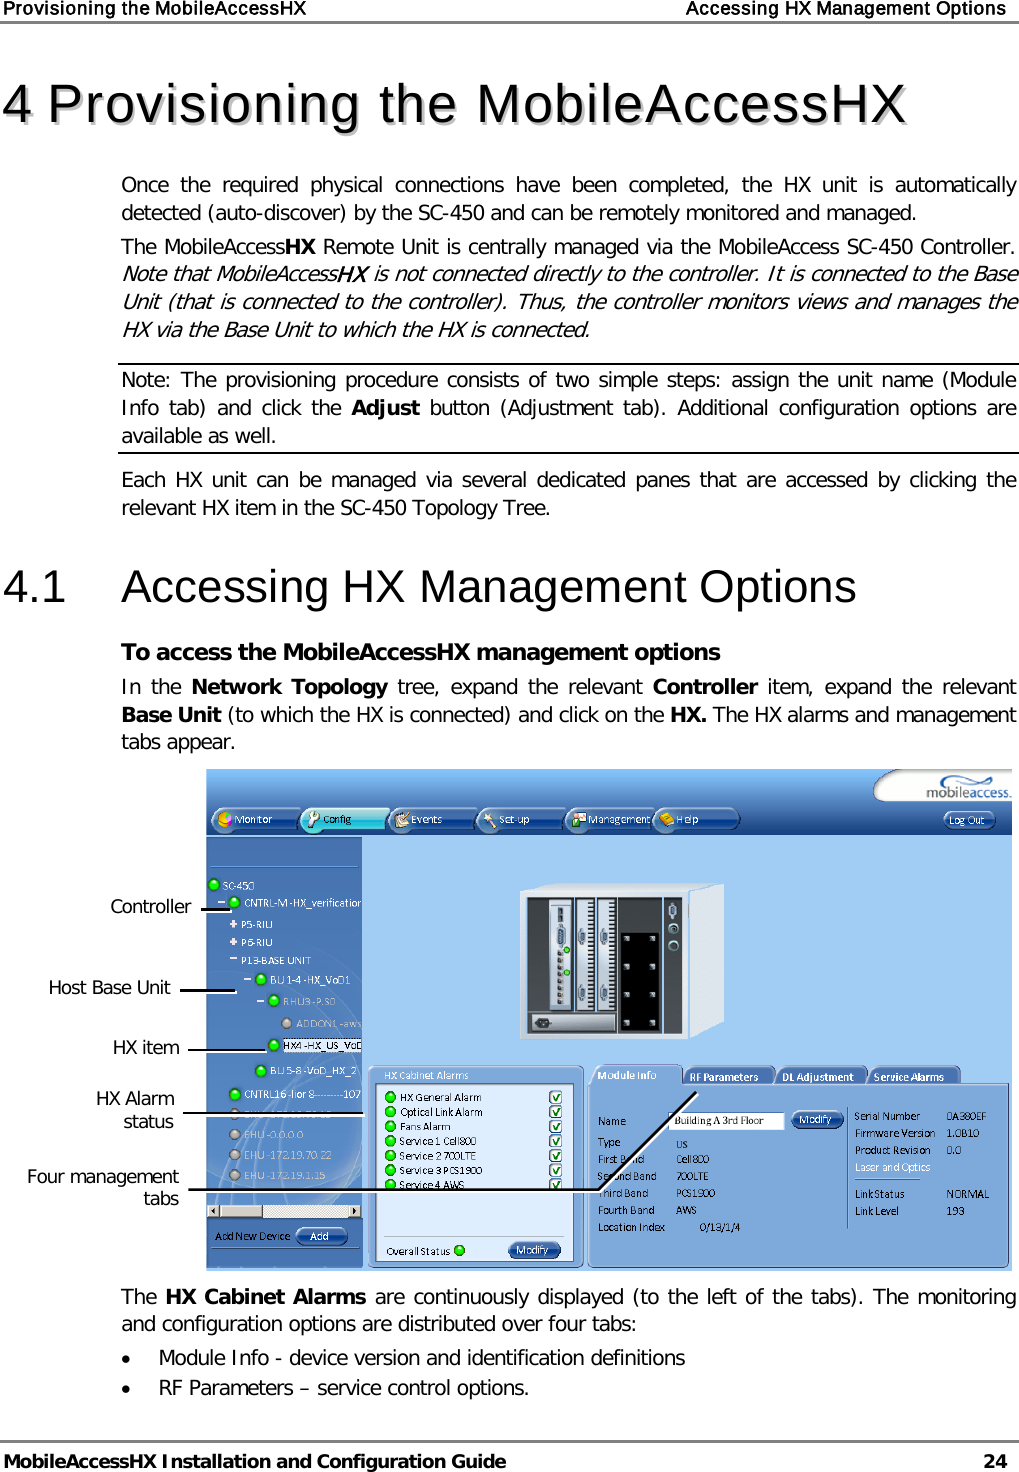 Provisioning the MobileAccessHX    Accessing HX Management Options   MobileAccessHX Installation and Configuration Guide   24  44  PPrroovviissiioonniinngg  tthhee  MMoobbiilleeAAcccceessssHHXX  Once the required physical connections have been completed, the HX  unit is automatically detected (auto-discover) by the SC-450 and can be remotely monitored and managed. The MobileAccessHX Remote Unit is centrally managed via the MobileAccess SC-450 Controller.  Note that MobileAccessHX is not connected directly to the controller. It is connected to the Base Unit (that is connected to the controller). Thus, the controller monitors views and manages the HX via the Base Unit to which the HX is connected. Note: The provisioning procedure consists of two simple steps: assign the unit name (Module Info tab) and click the Adjust  button (Adjustment tab). Additional configuration options are available as well. Each HX unit can be managed via several dedicated panes that are accessed by clicking the relevant HX item in the SC-450 Topology Tree. 4.1  Accessing HX Management Options To access the MobileAccessHX management options In the Network Topology tree, expand the relevant Controller item, expand the relevant Base Unit (to which the HX is connected) and click on the HX. The HX alarms and management tabs appear.  The HX Cabinet Alarms are continuously displayed (to the left of the tabs). The monitoring and configuration options are distributed over four tabs: • Module Info - device version and identification definitions  • RF Parameters – service control options. HX item Host Base Unit HX Alarm status Four management tabs Controller  